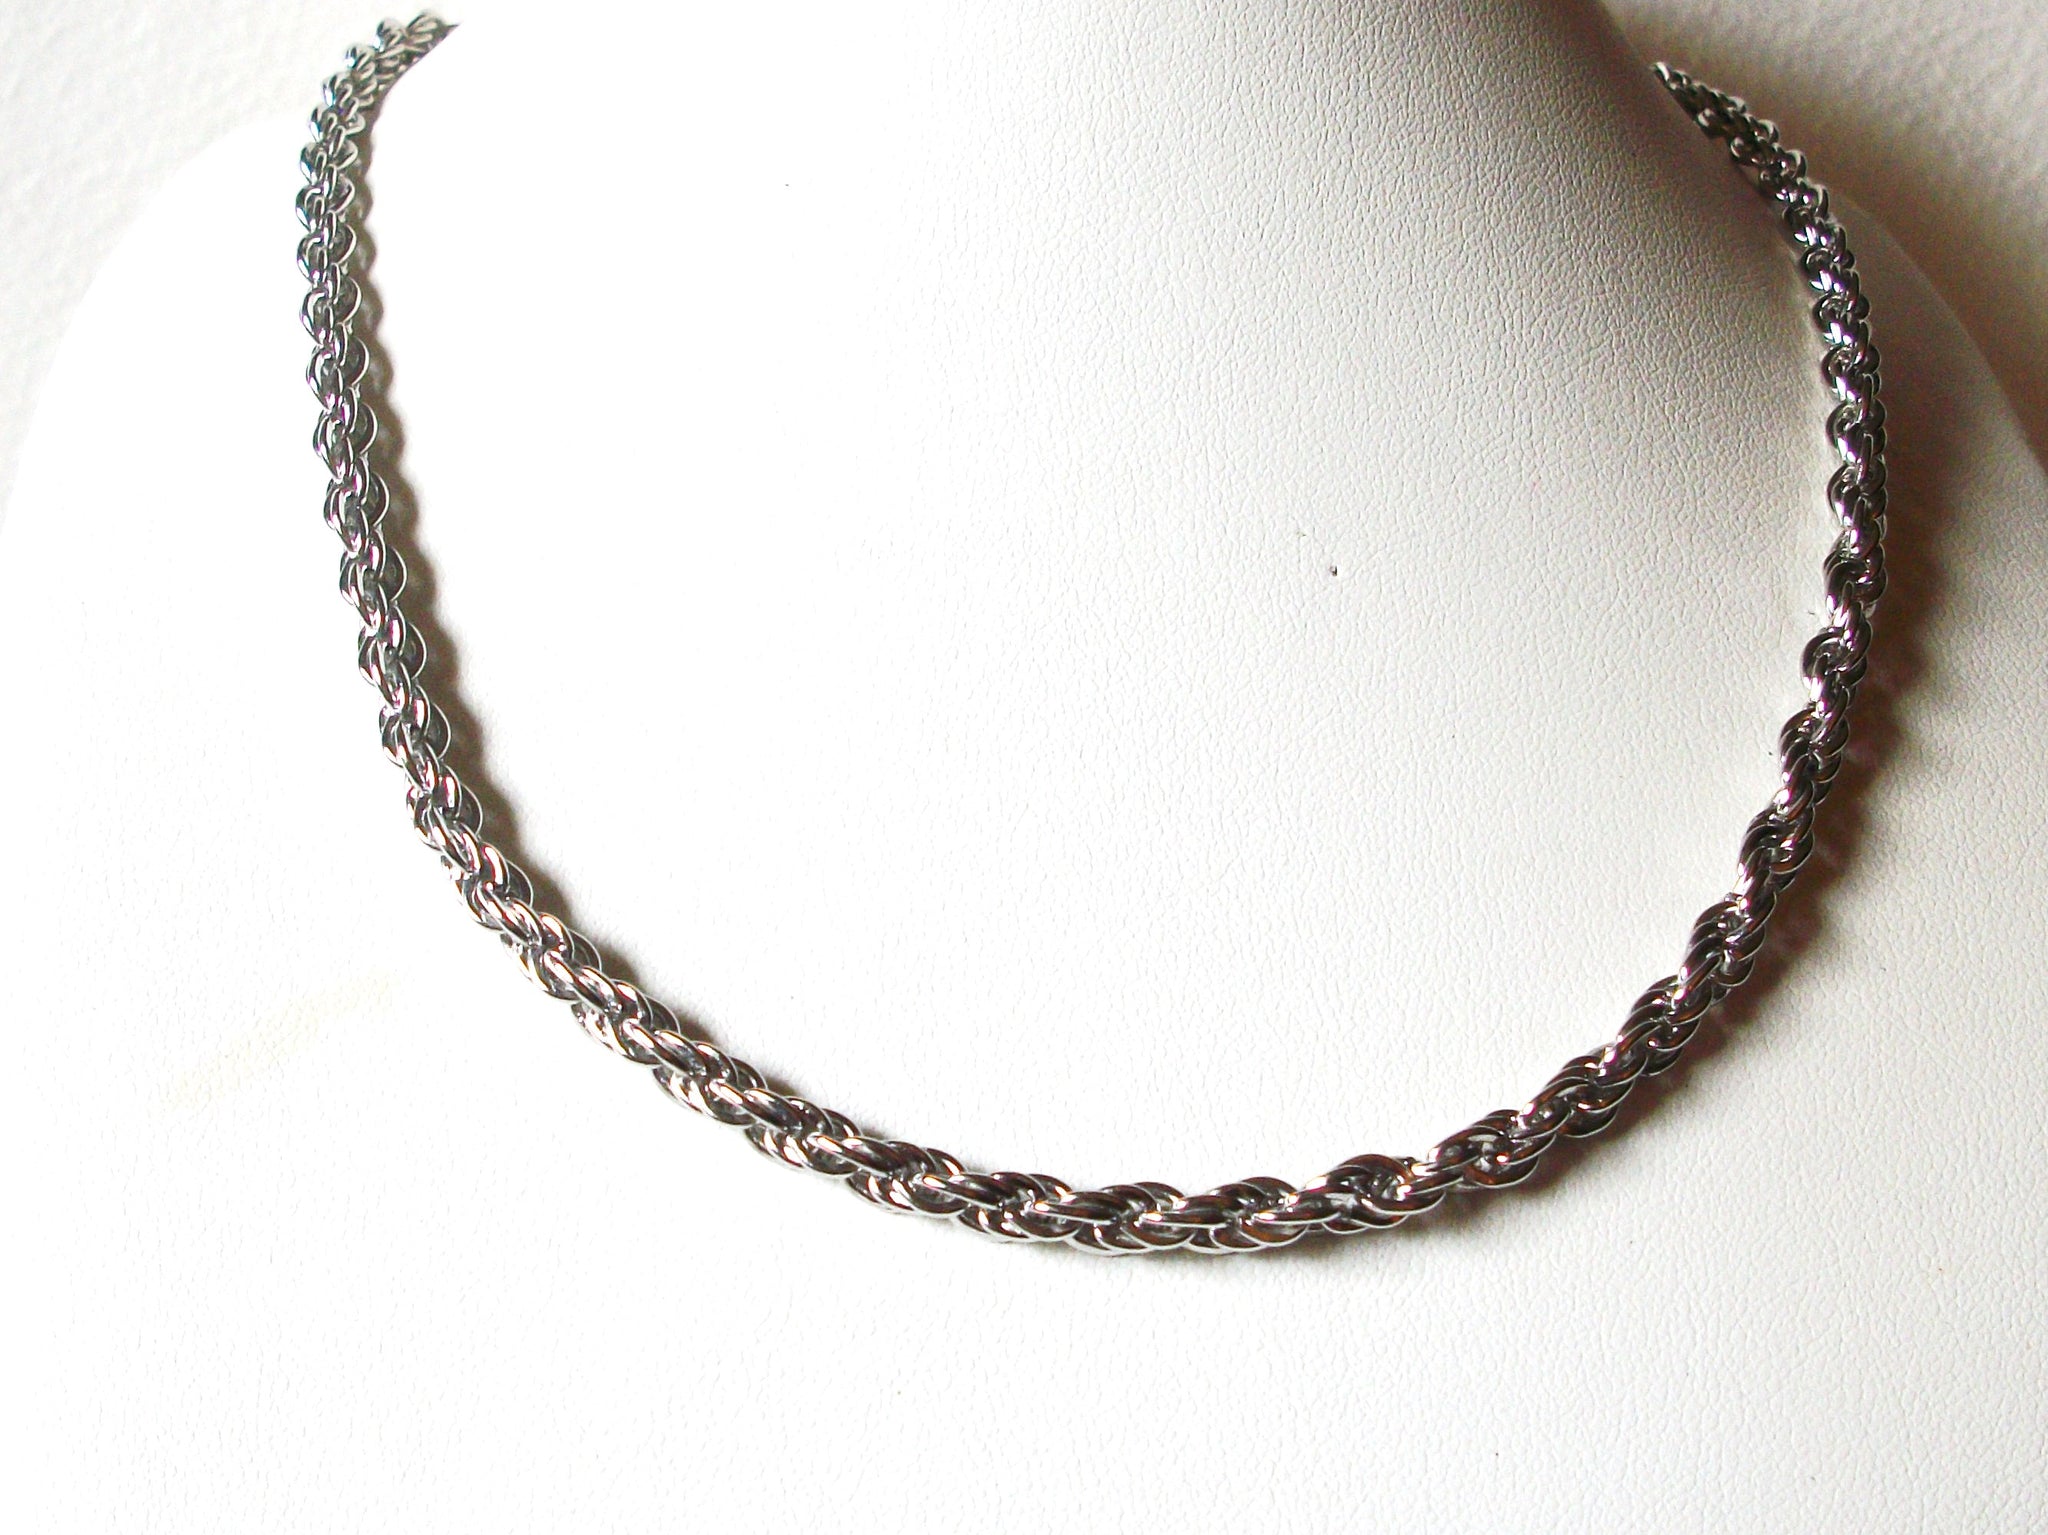 Vintage Silver Toned Rope Chain Links 18" Necklace 82017